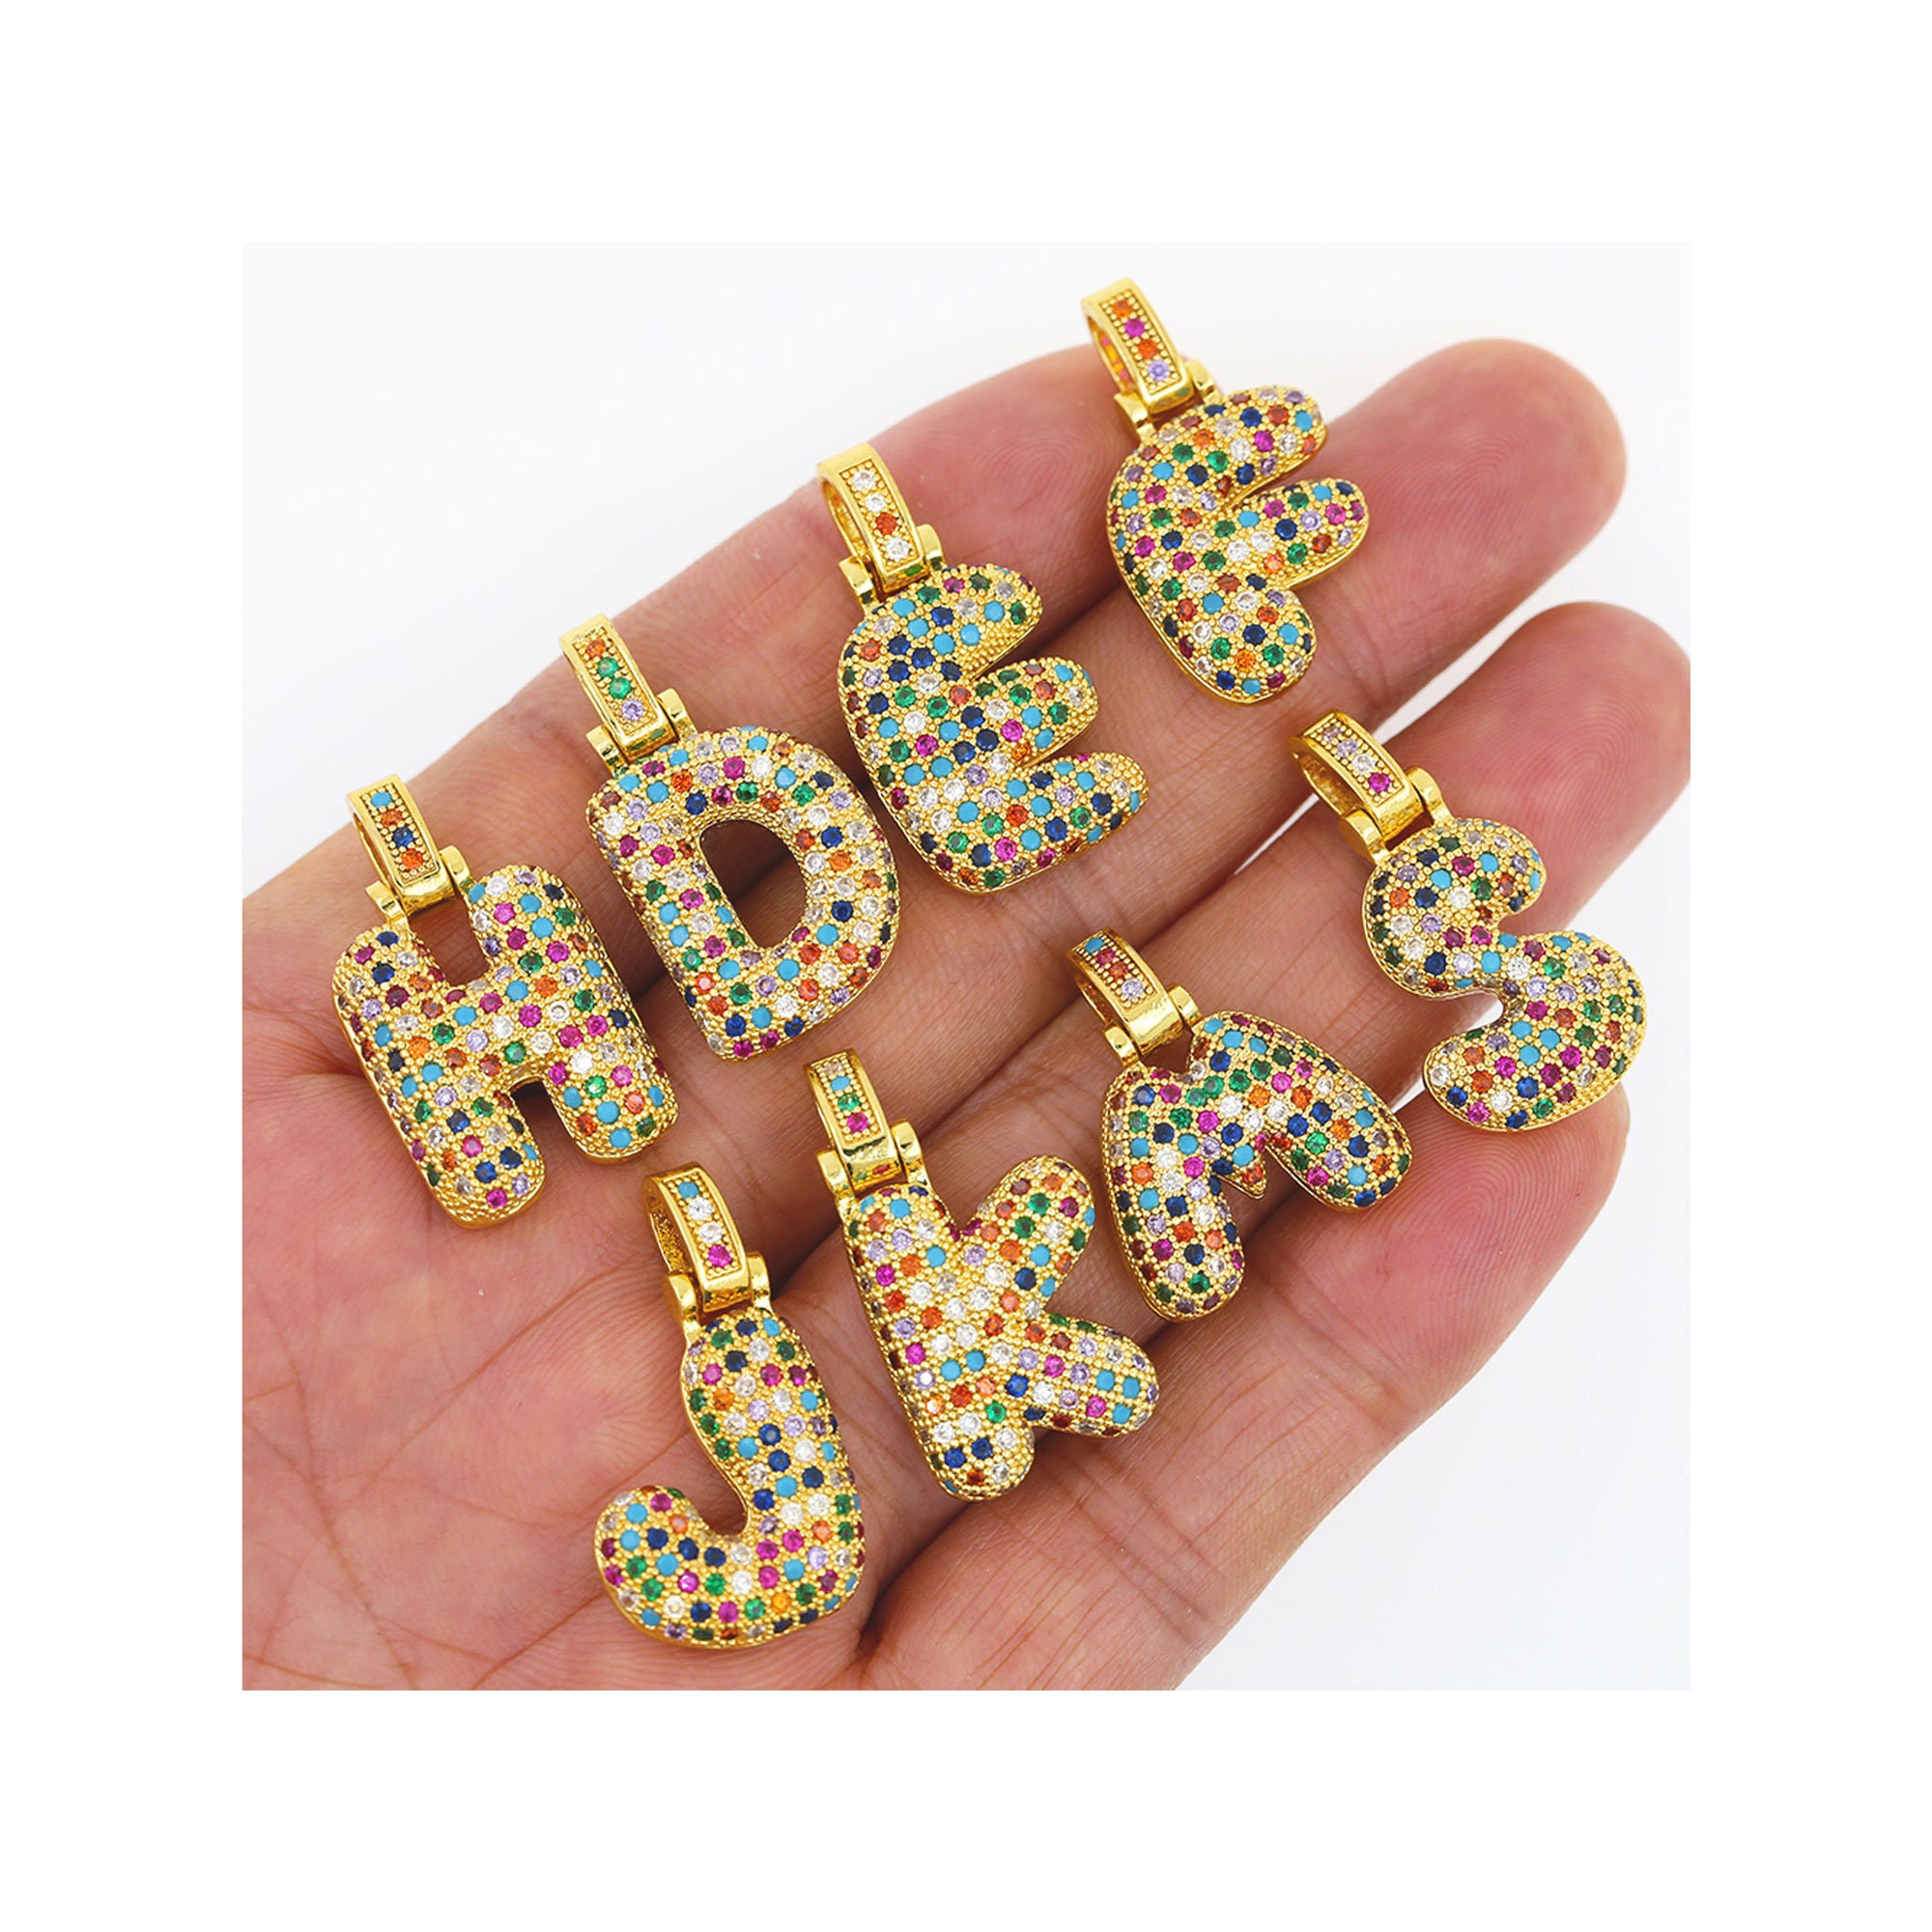 Cutout Enamel Letter & Number Beads, Gold Plated Colorful Symbol Beads for  Stretch Bracelets, DIY Word Jewelry, Multicolor Bead Charms 